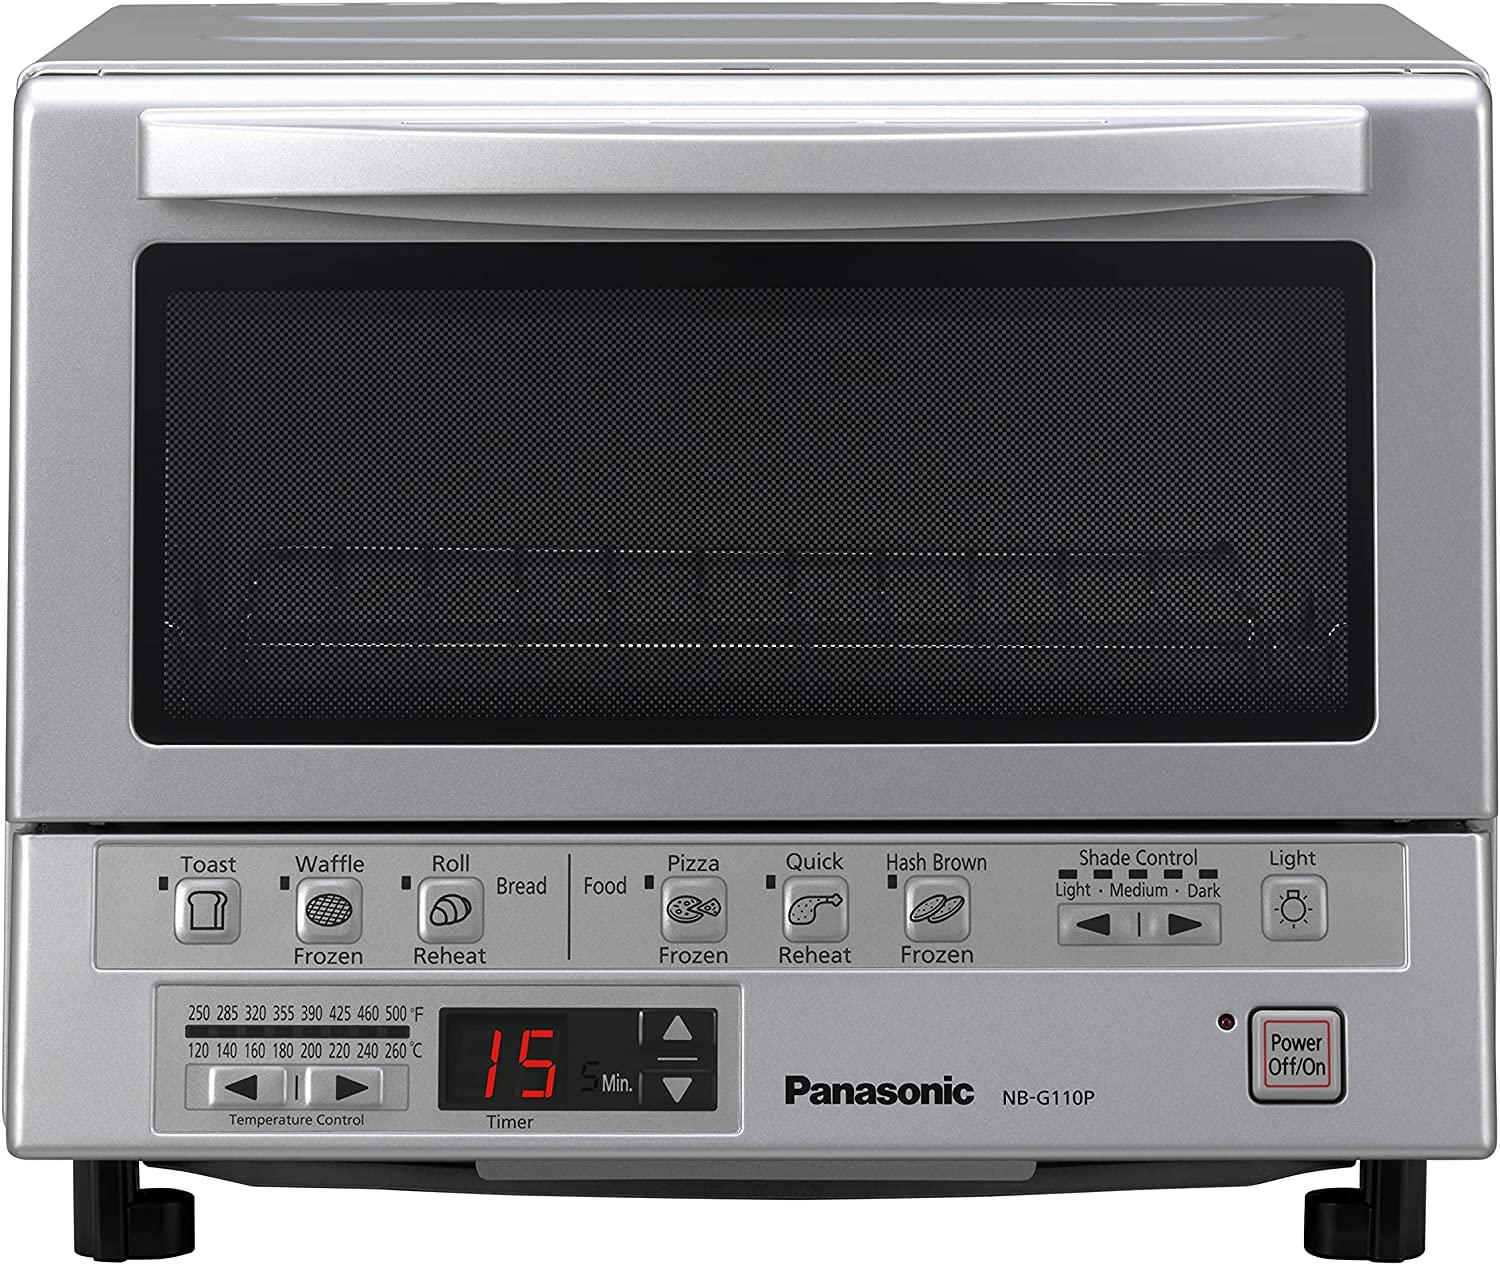 Panasonic NB-G110P FlashXpress Infrared Toaster Oven for $100 Shipped